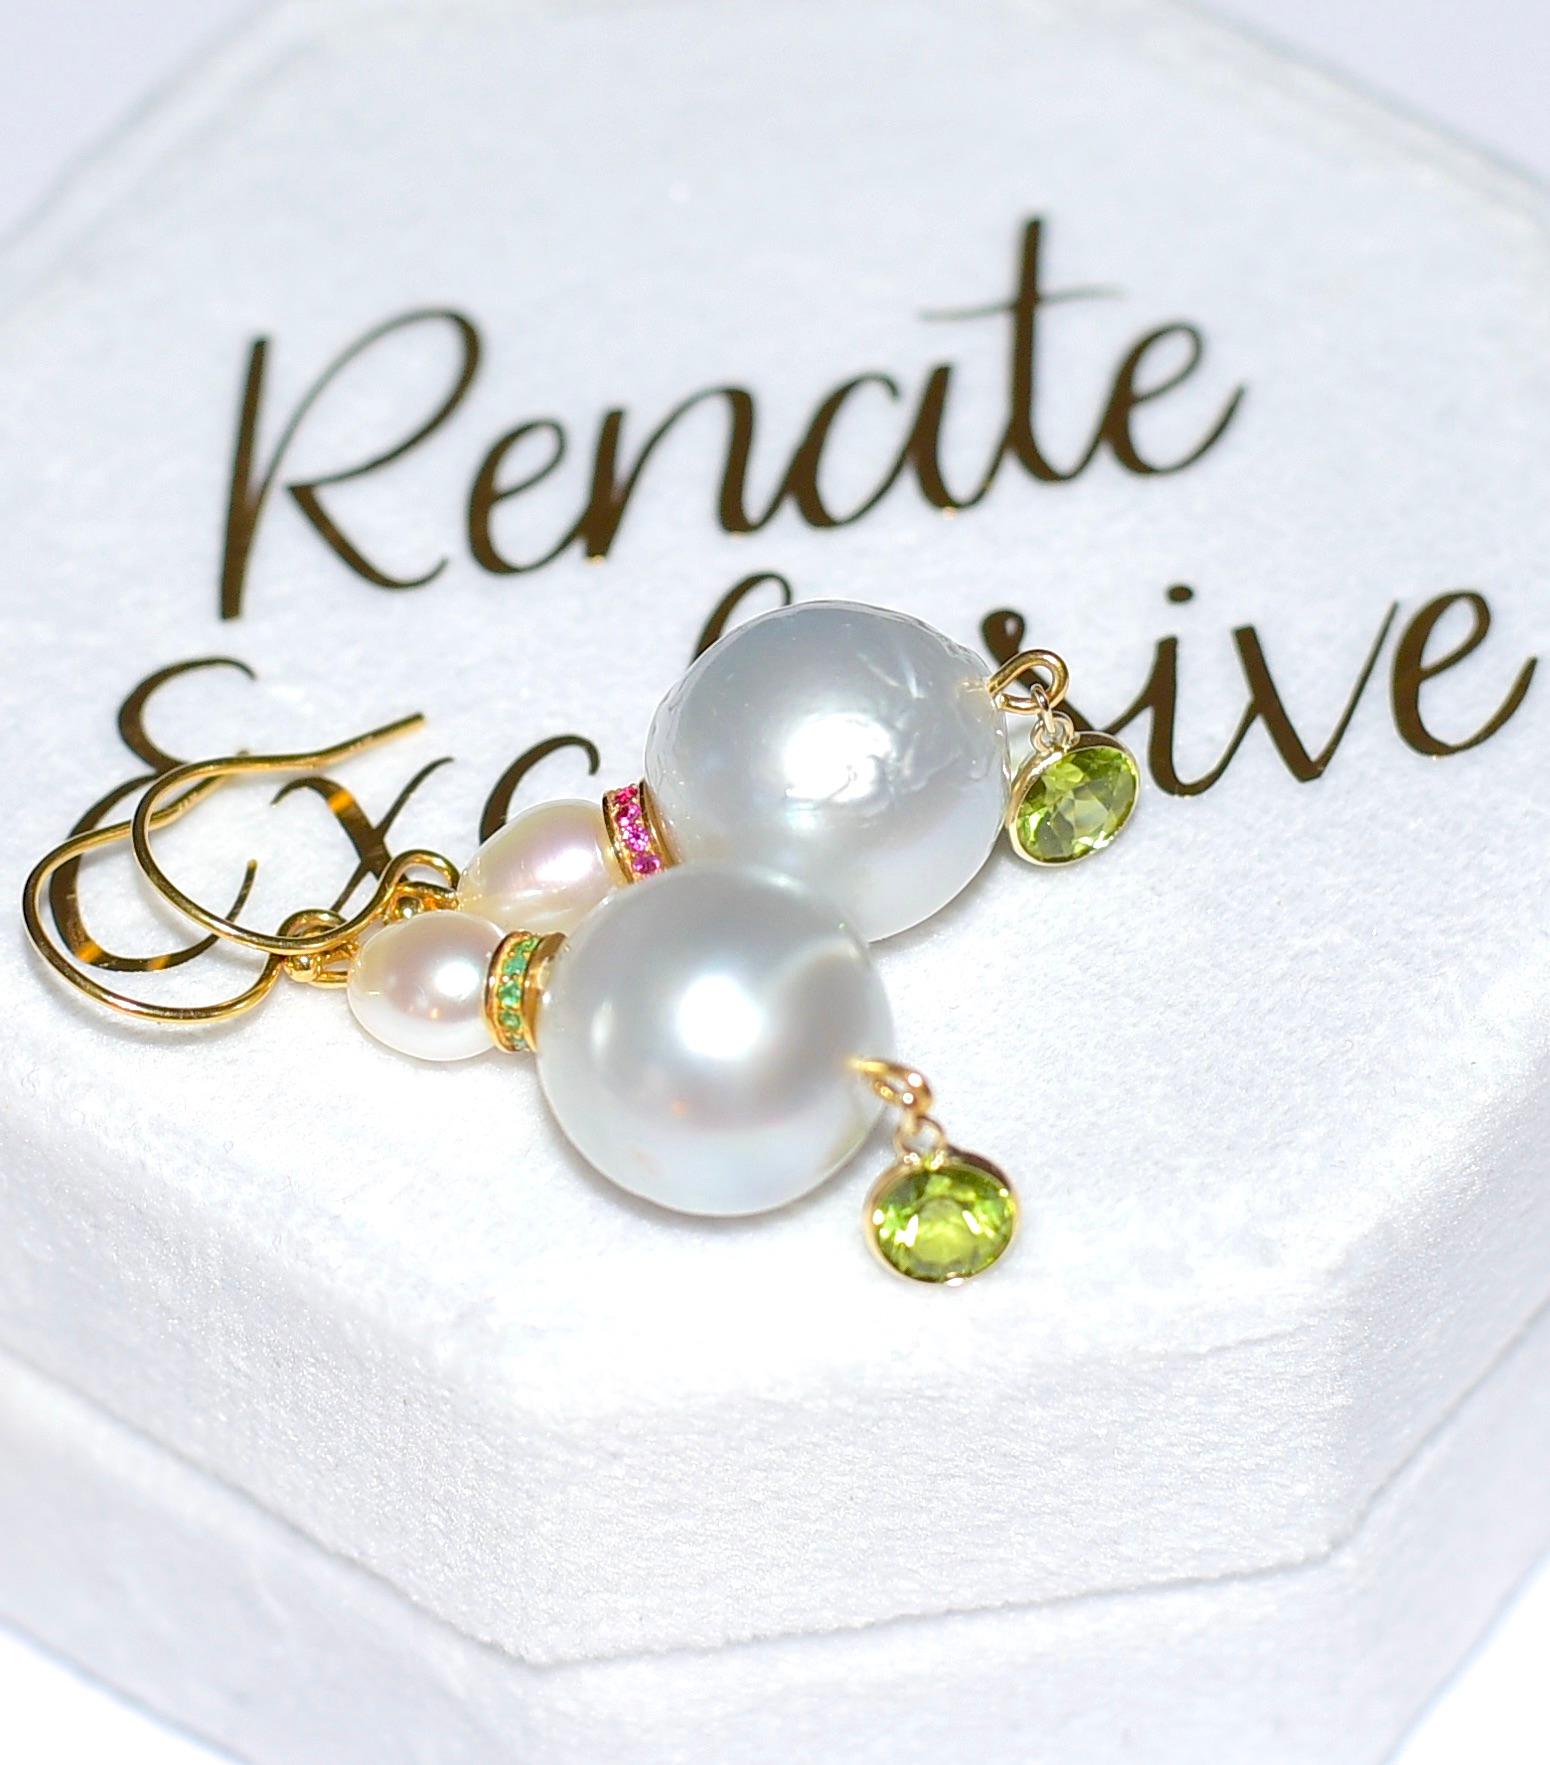 Huge White South Sea Cultured Pearl (14mmx15mm). with elegant two-tone 18K Solid Yellow Gold Bead cup and 14K Solid Yellow gold ear wires. 
Two-tone eternity beads are fun! (Natural Ruby and Emerald) and little Peridot bezel bead makes look even